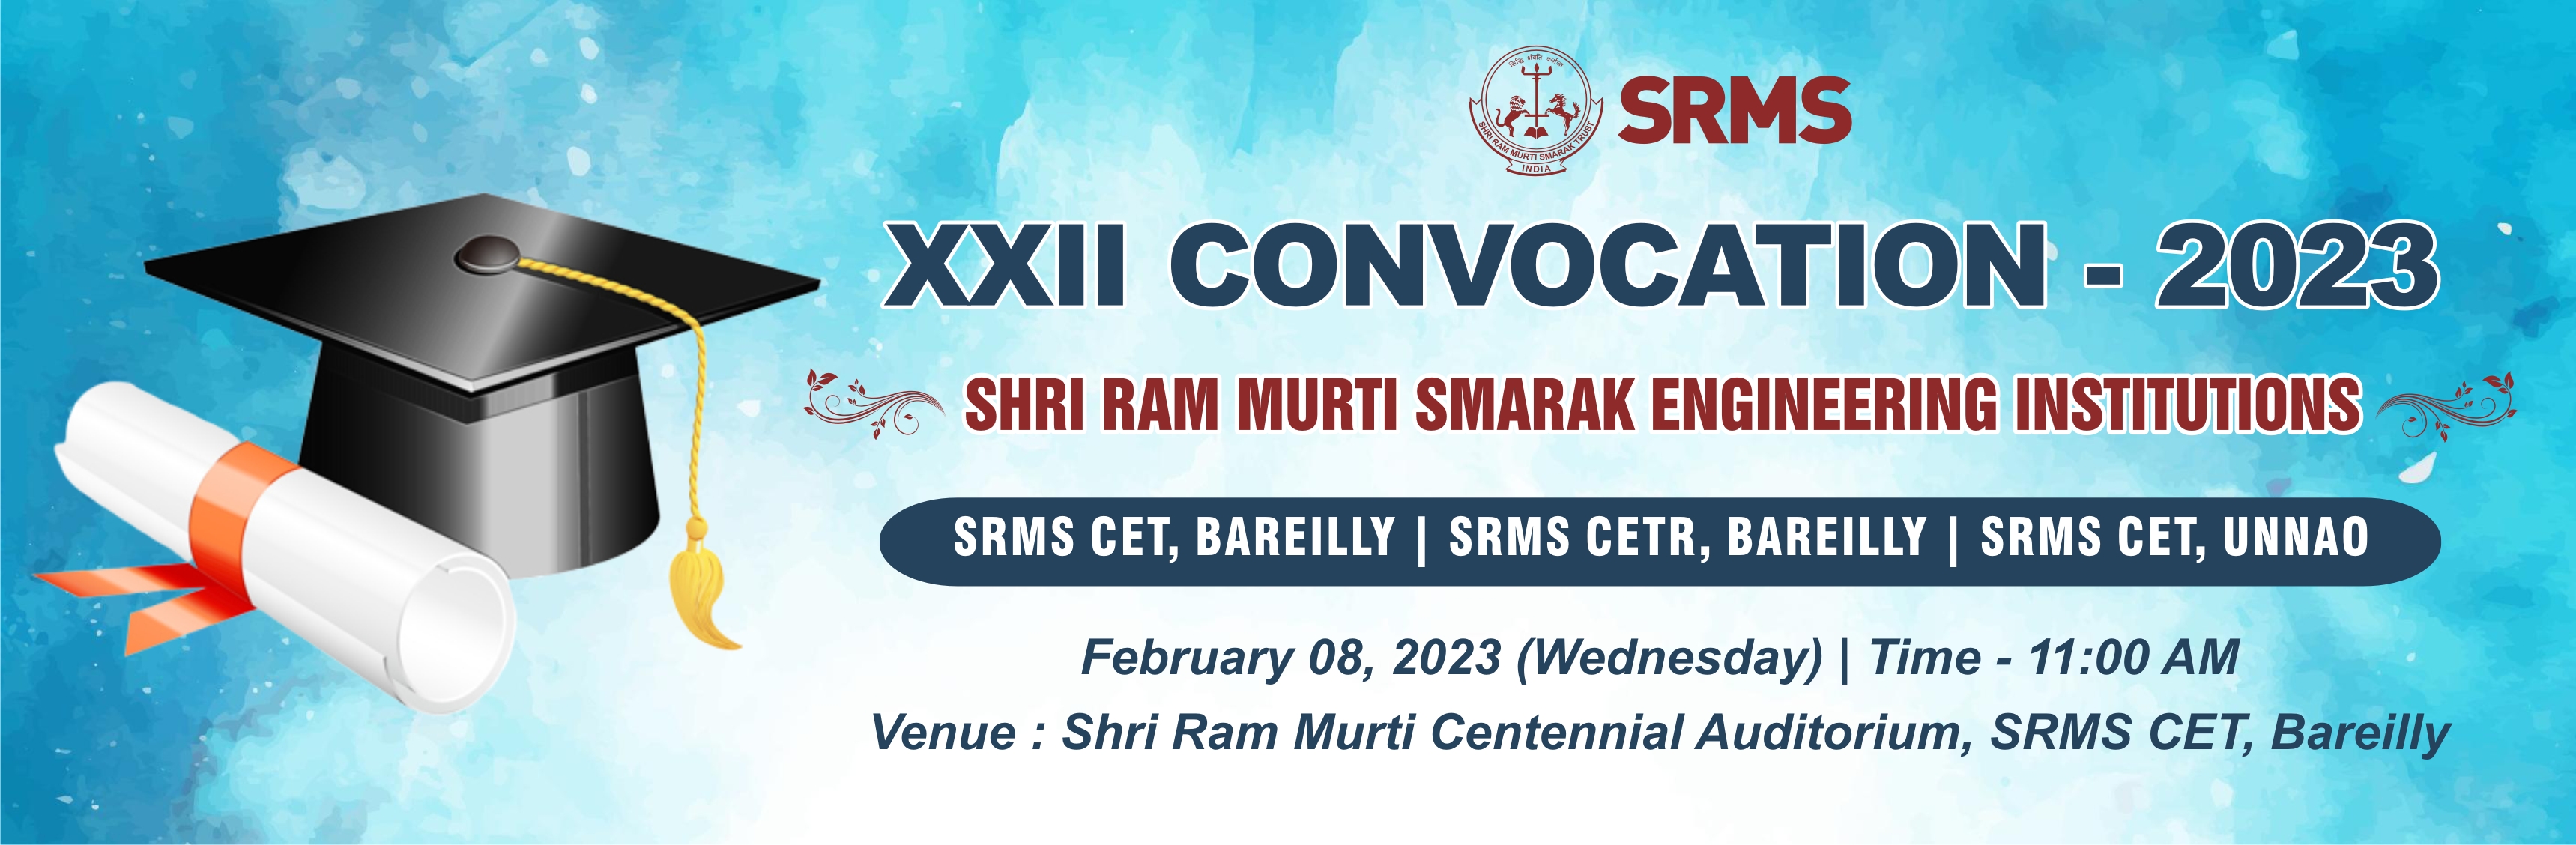 XXII-Convocation-2023-Web-Banner